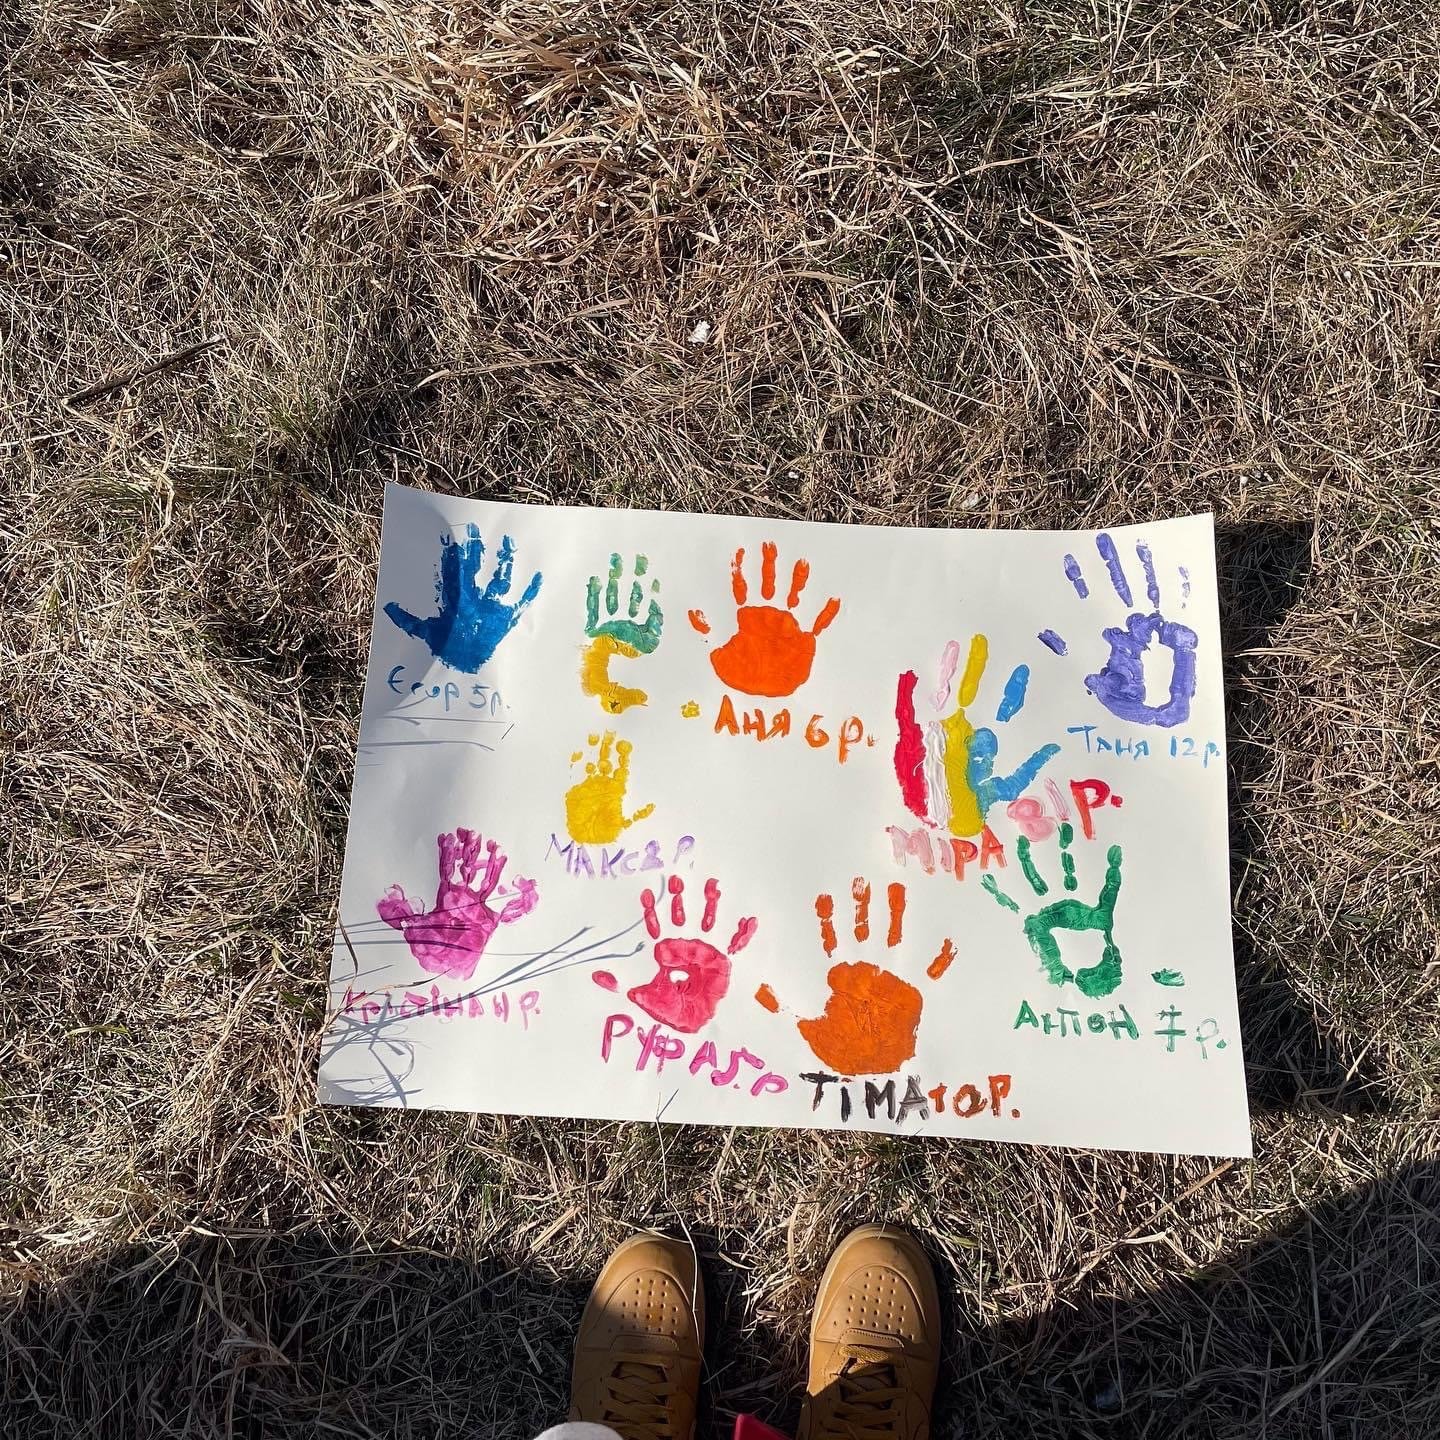 Handprints of Ukrainian refugee children in shelters created by Pastor Igor Buben.  Your donations support these shelters.